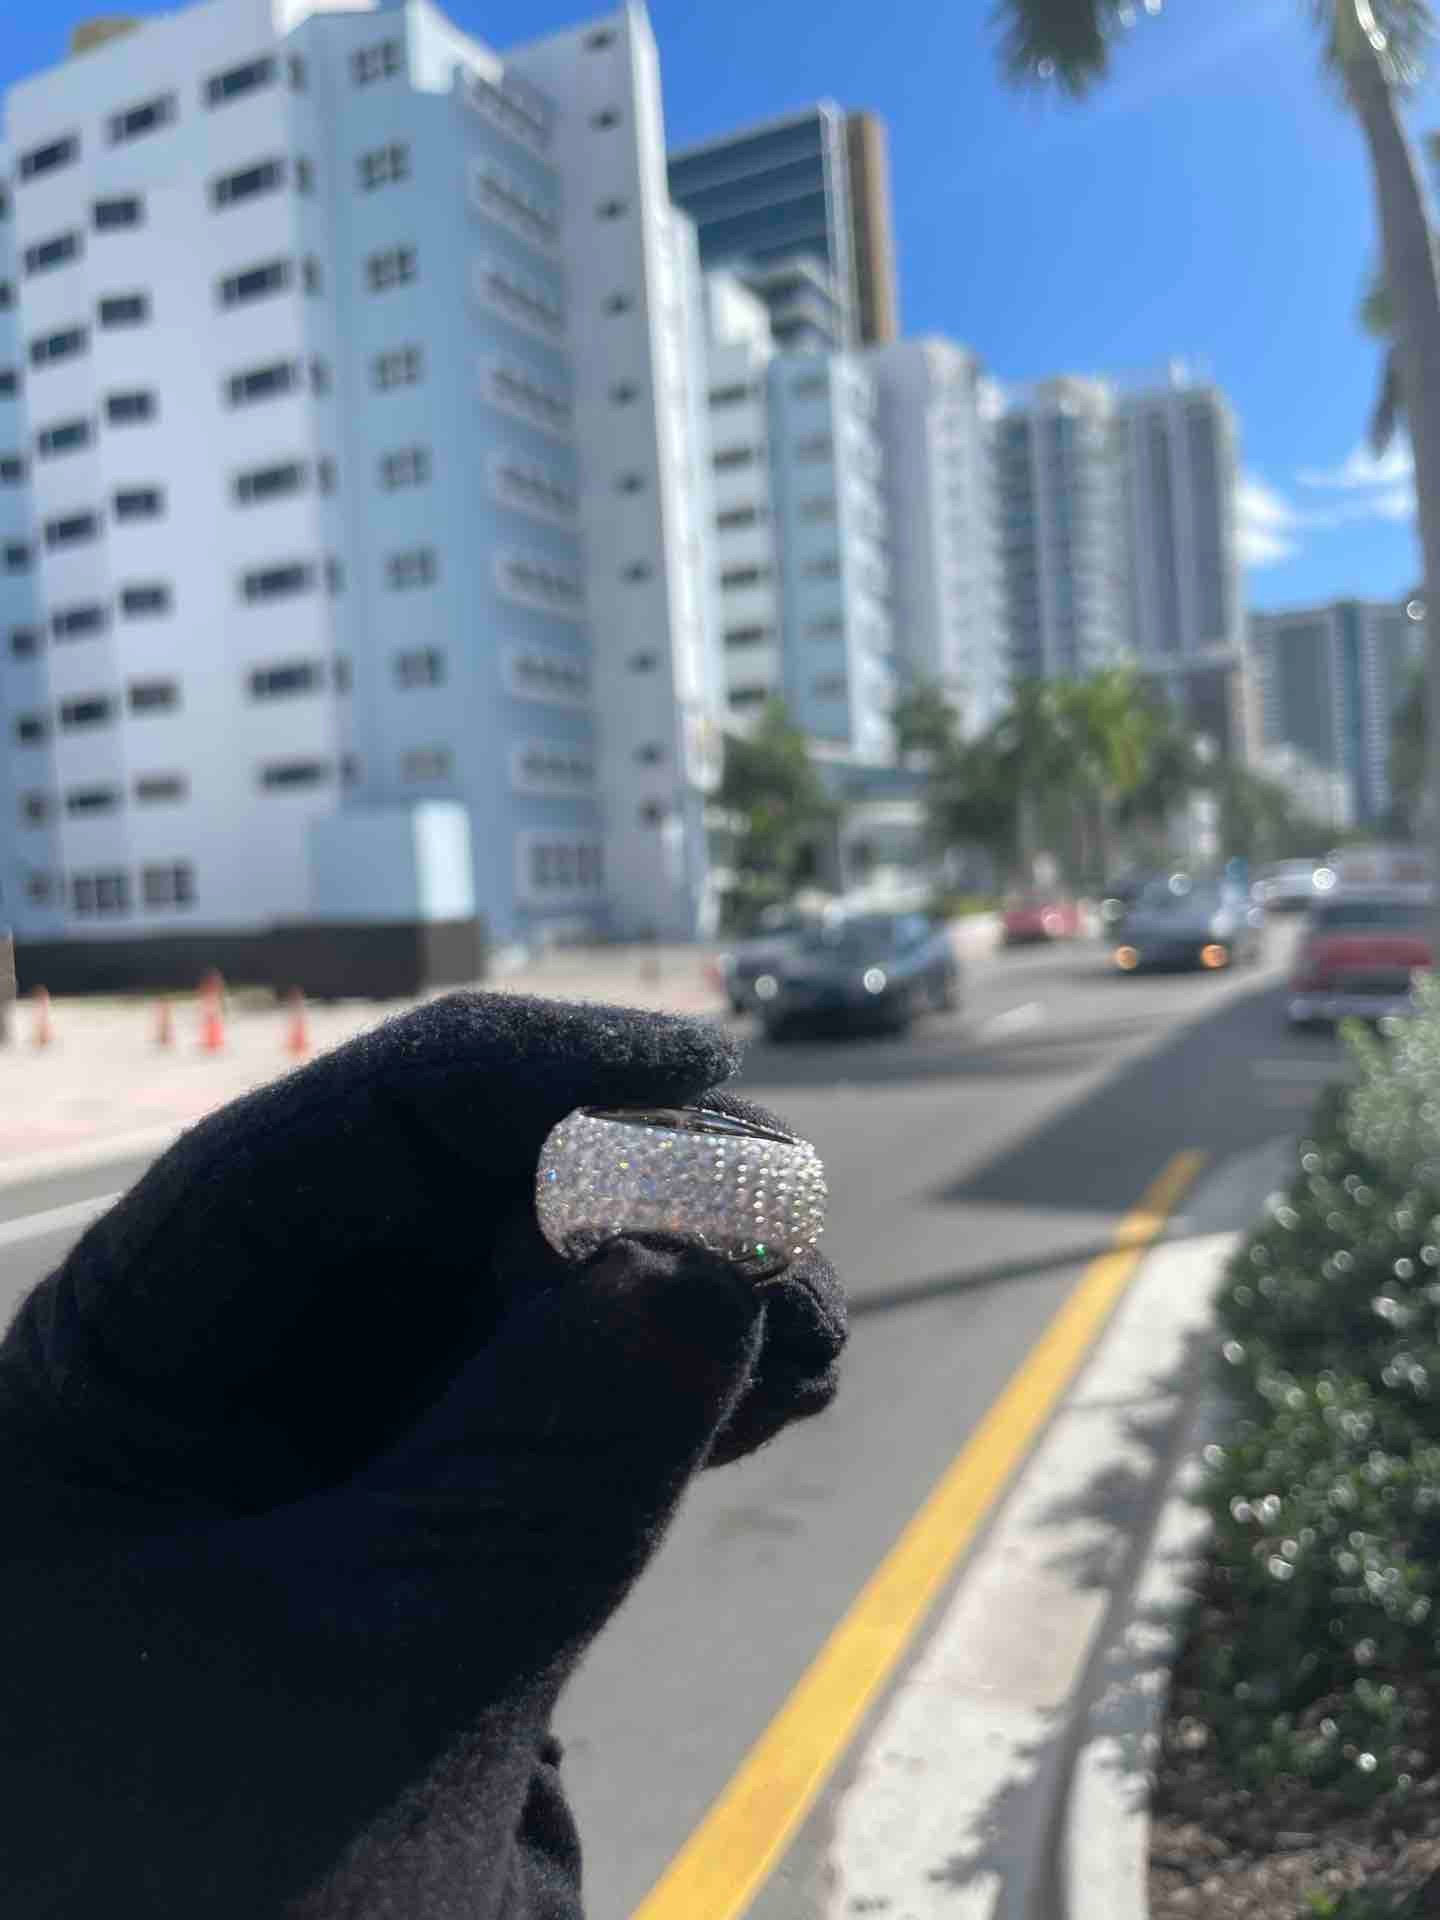 14k ICED OUT VVS RING FULLY